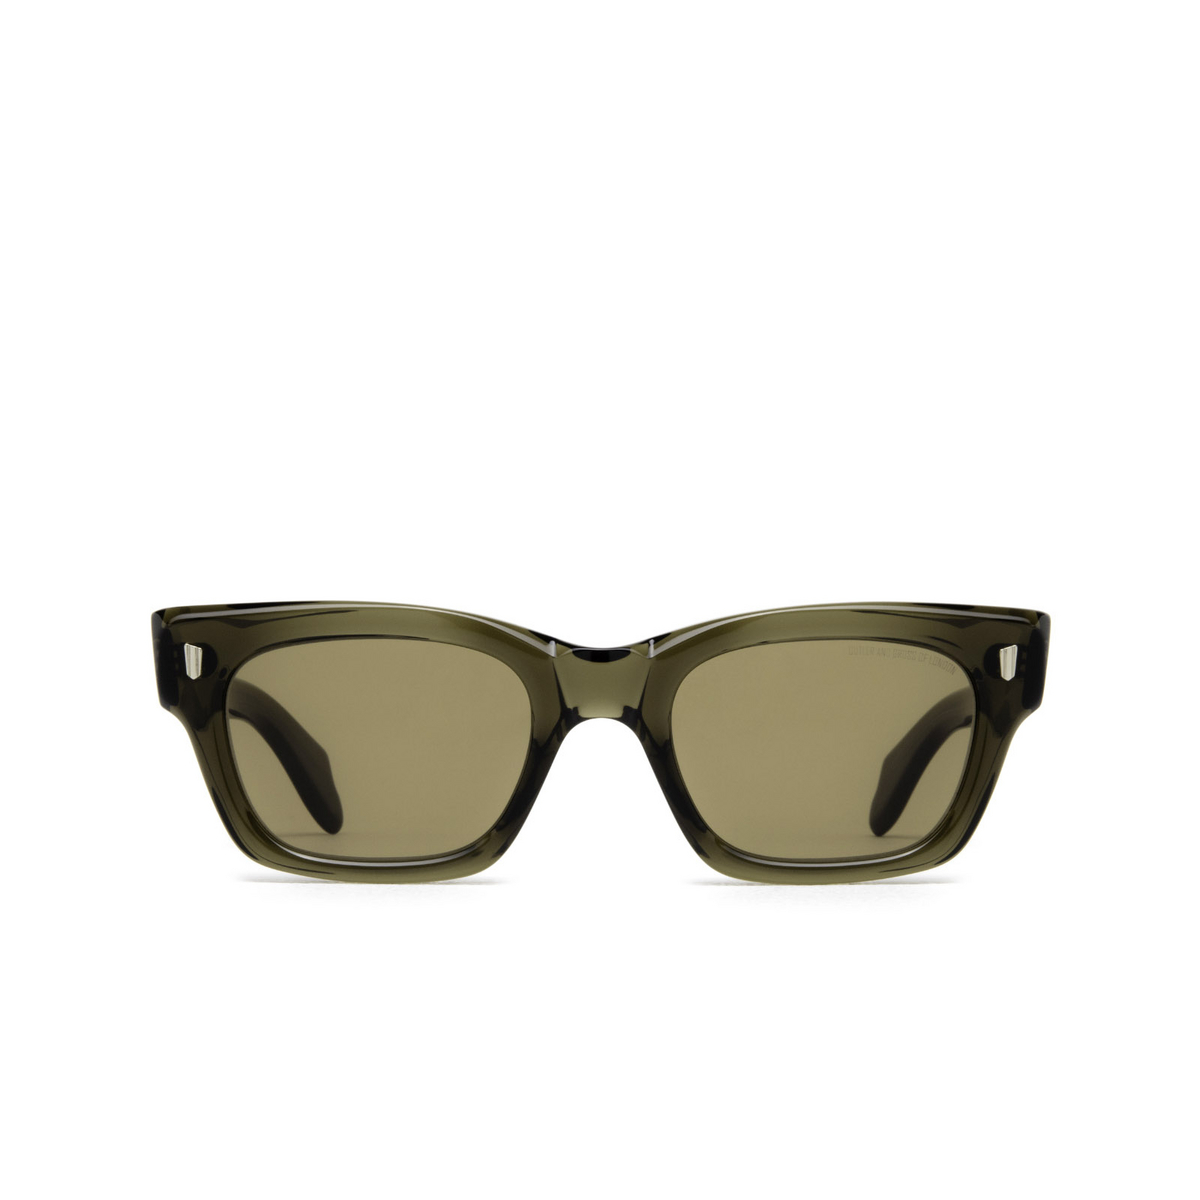 Cutler and Gross 1391 Sunglasses 03 Olive - front view